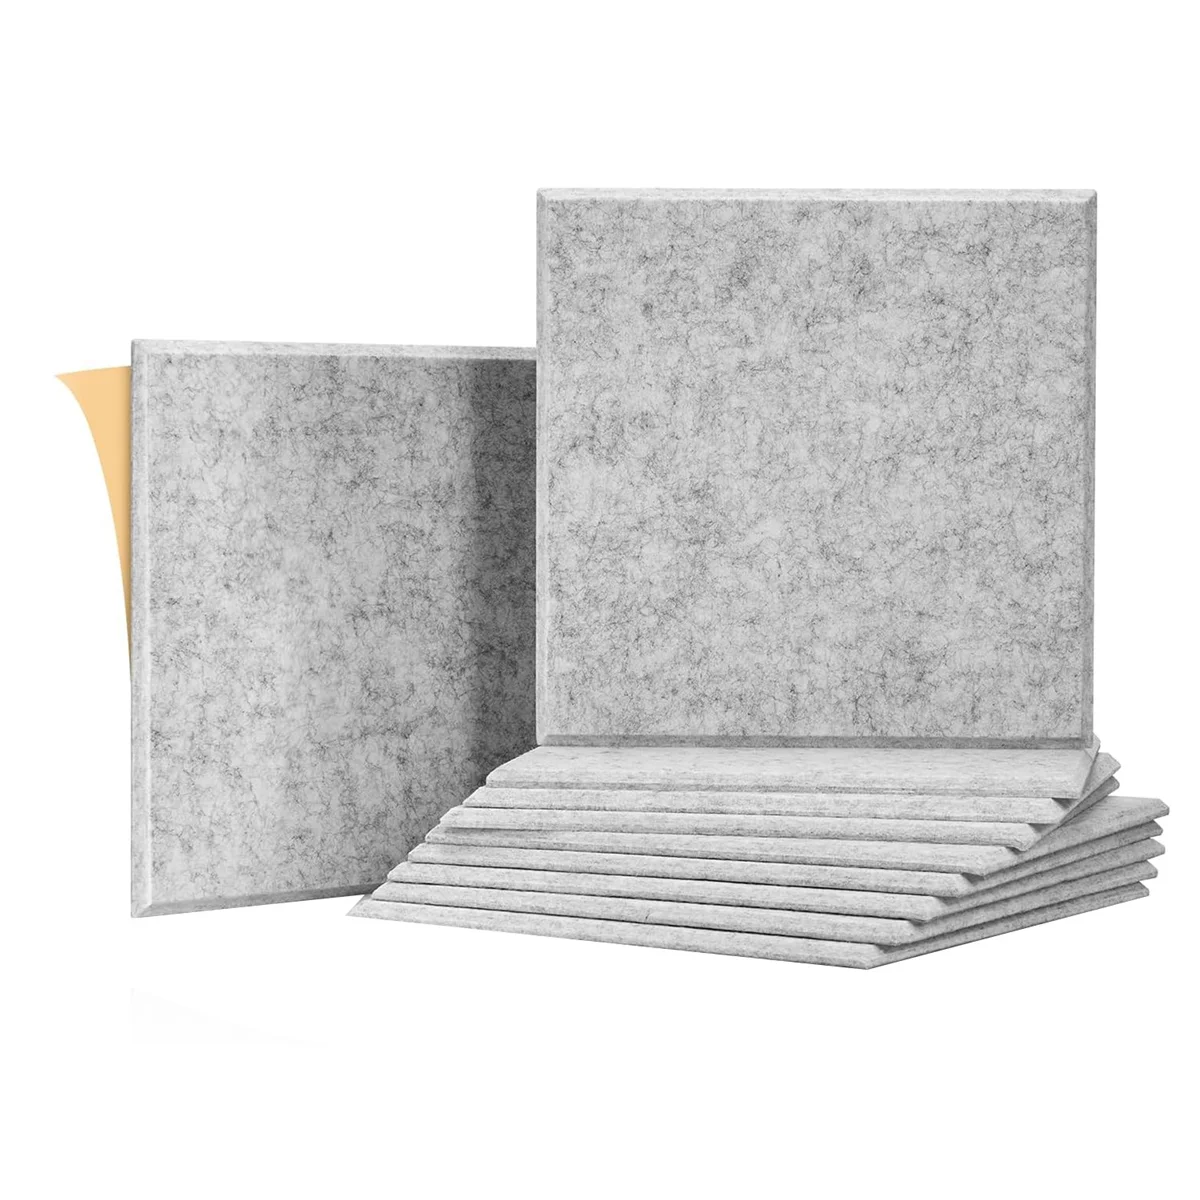 

10Pack Sound Proof Panels for Walls,Self-Adhesive Acoustic Panels 12x12x0.4In for Recording Studio,Office,Home,A